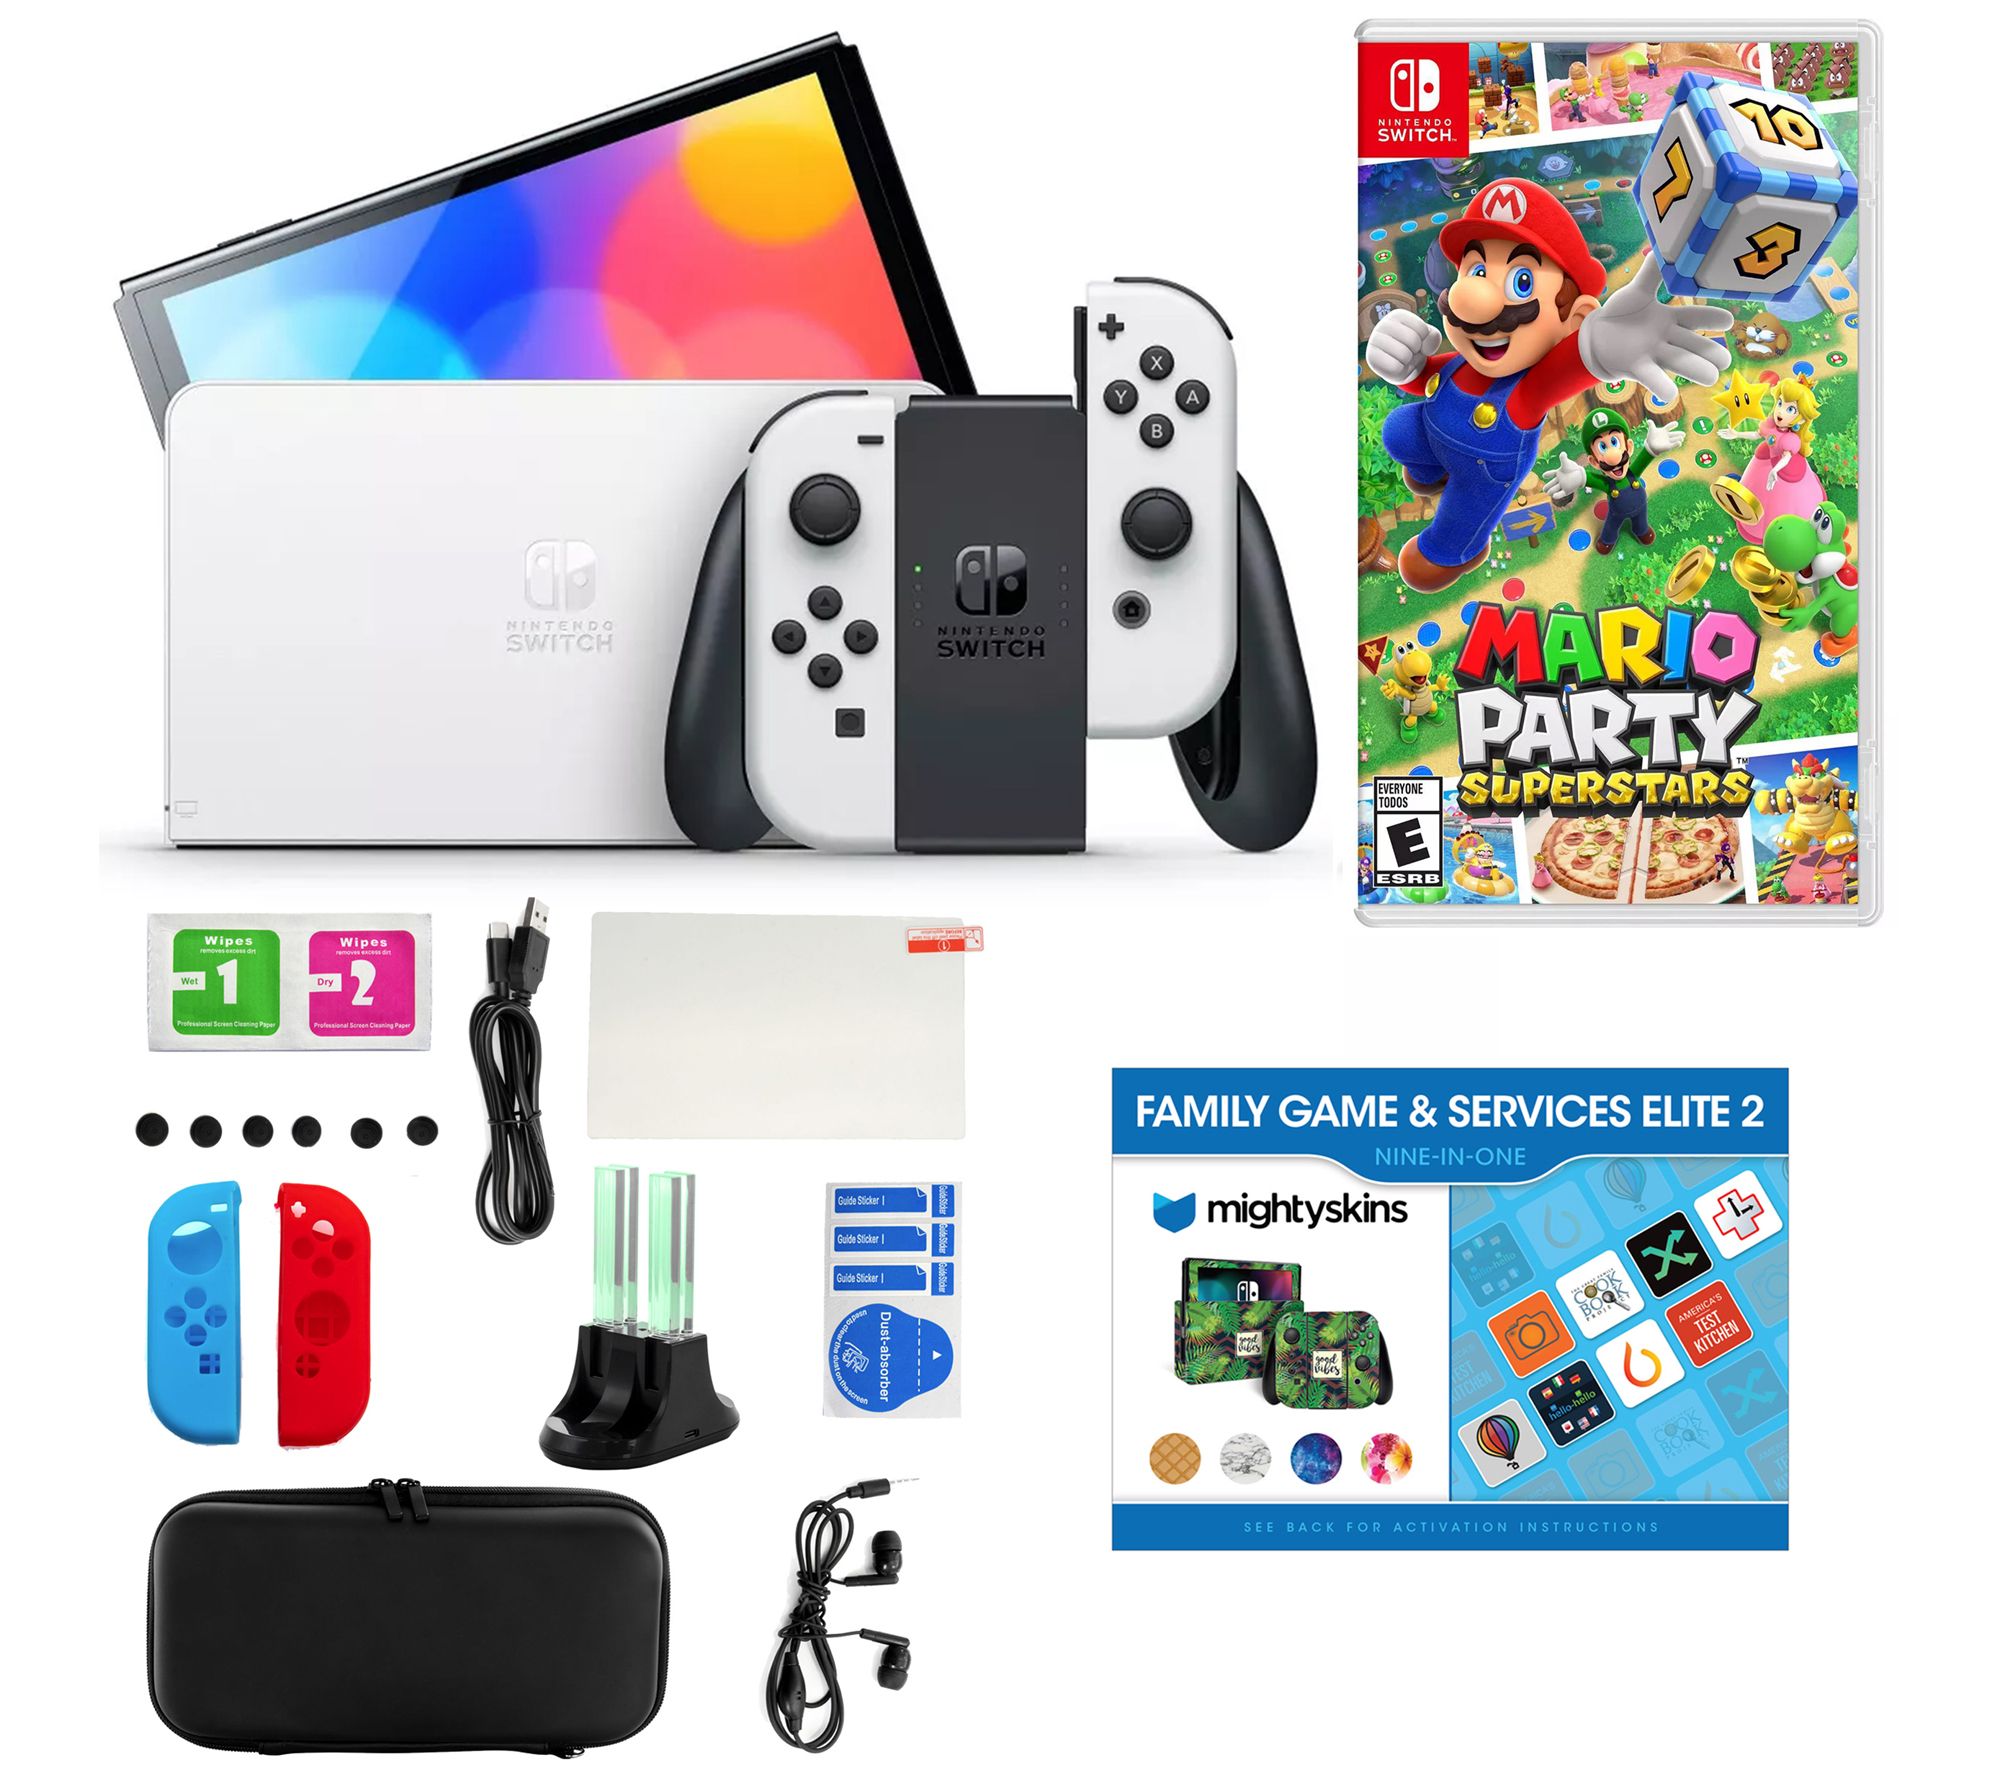 Nintendo Switch w/ Super Mario Party (Full Game Download) - Bundle